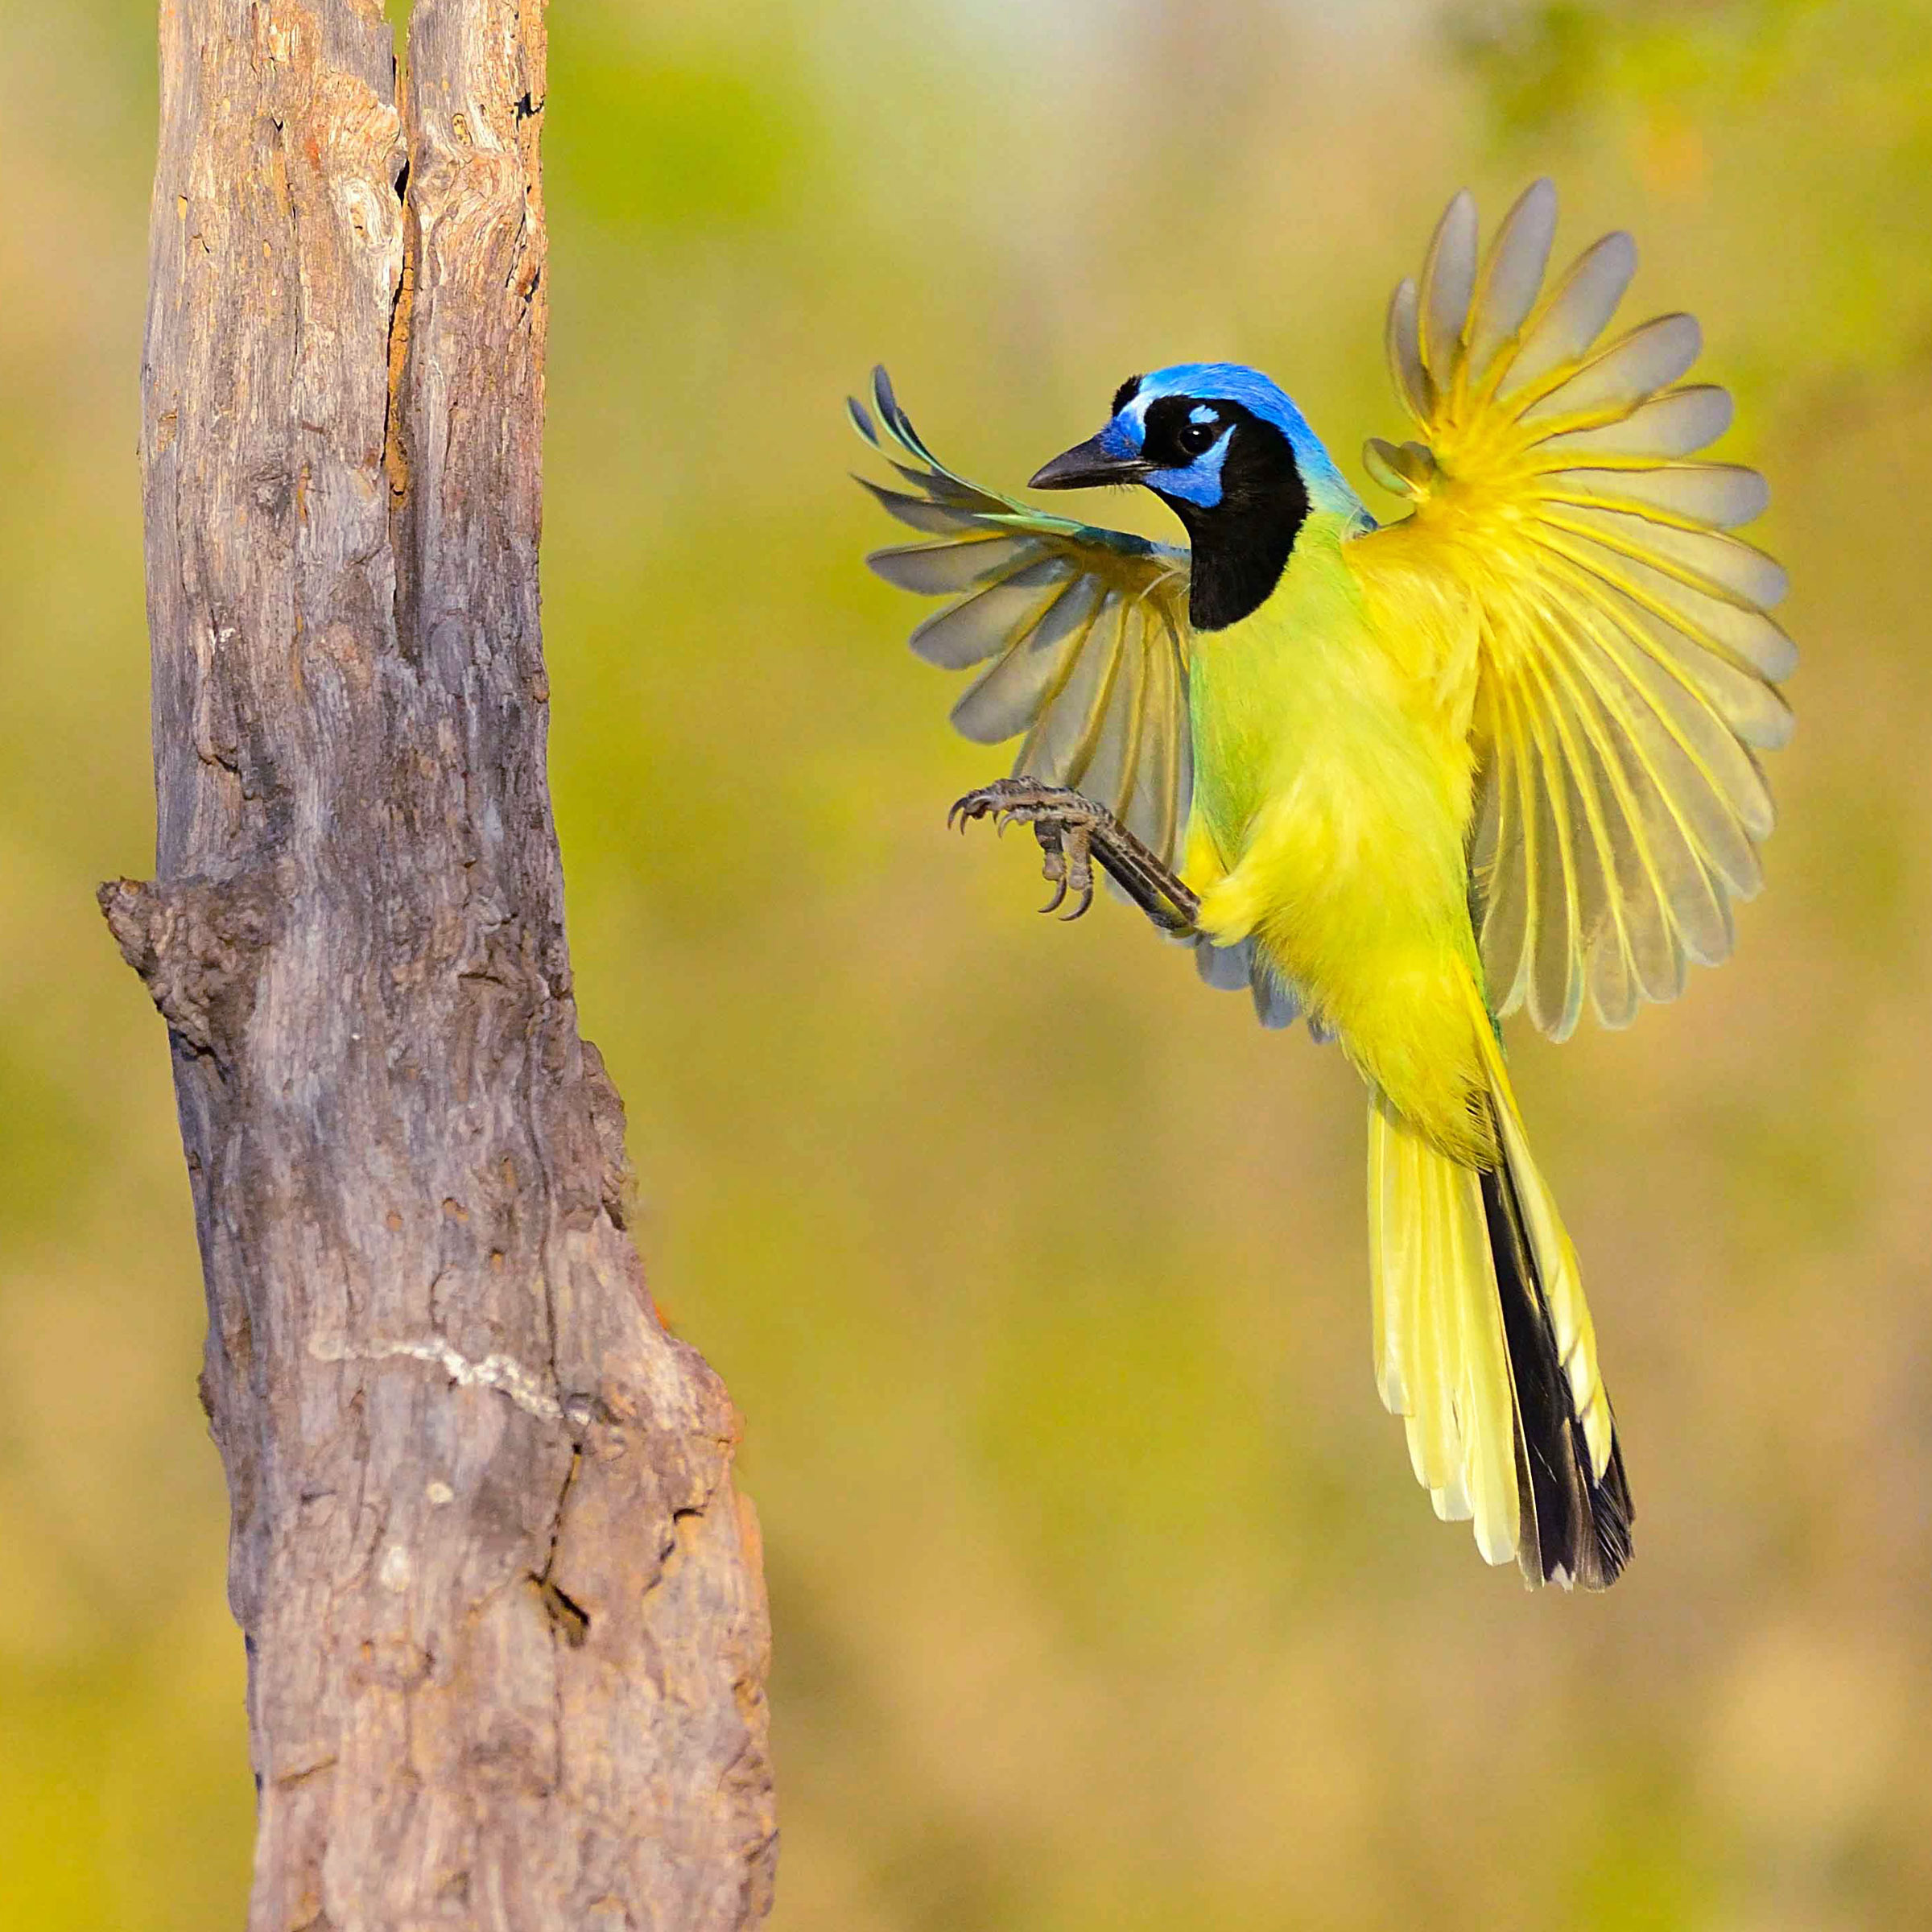 6 Other Birds (Beyond the Bunting) That Make People Go Nuts | Audubon